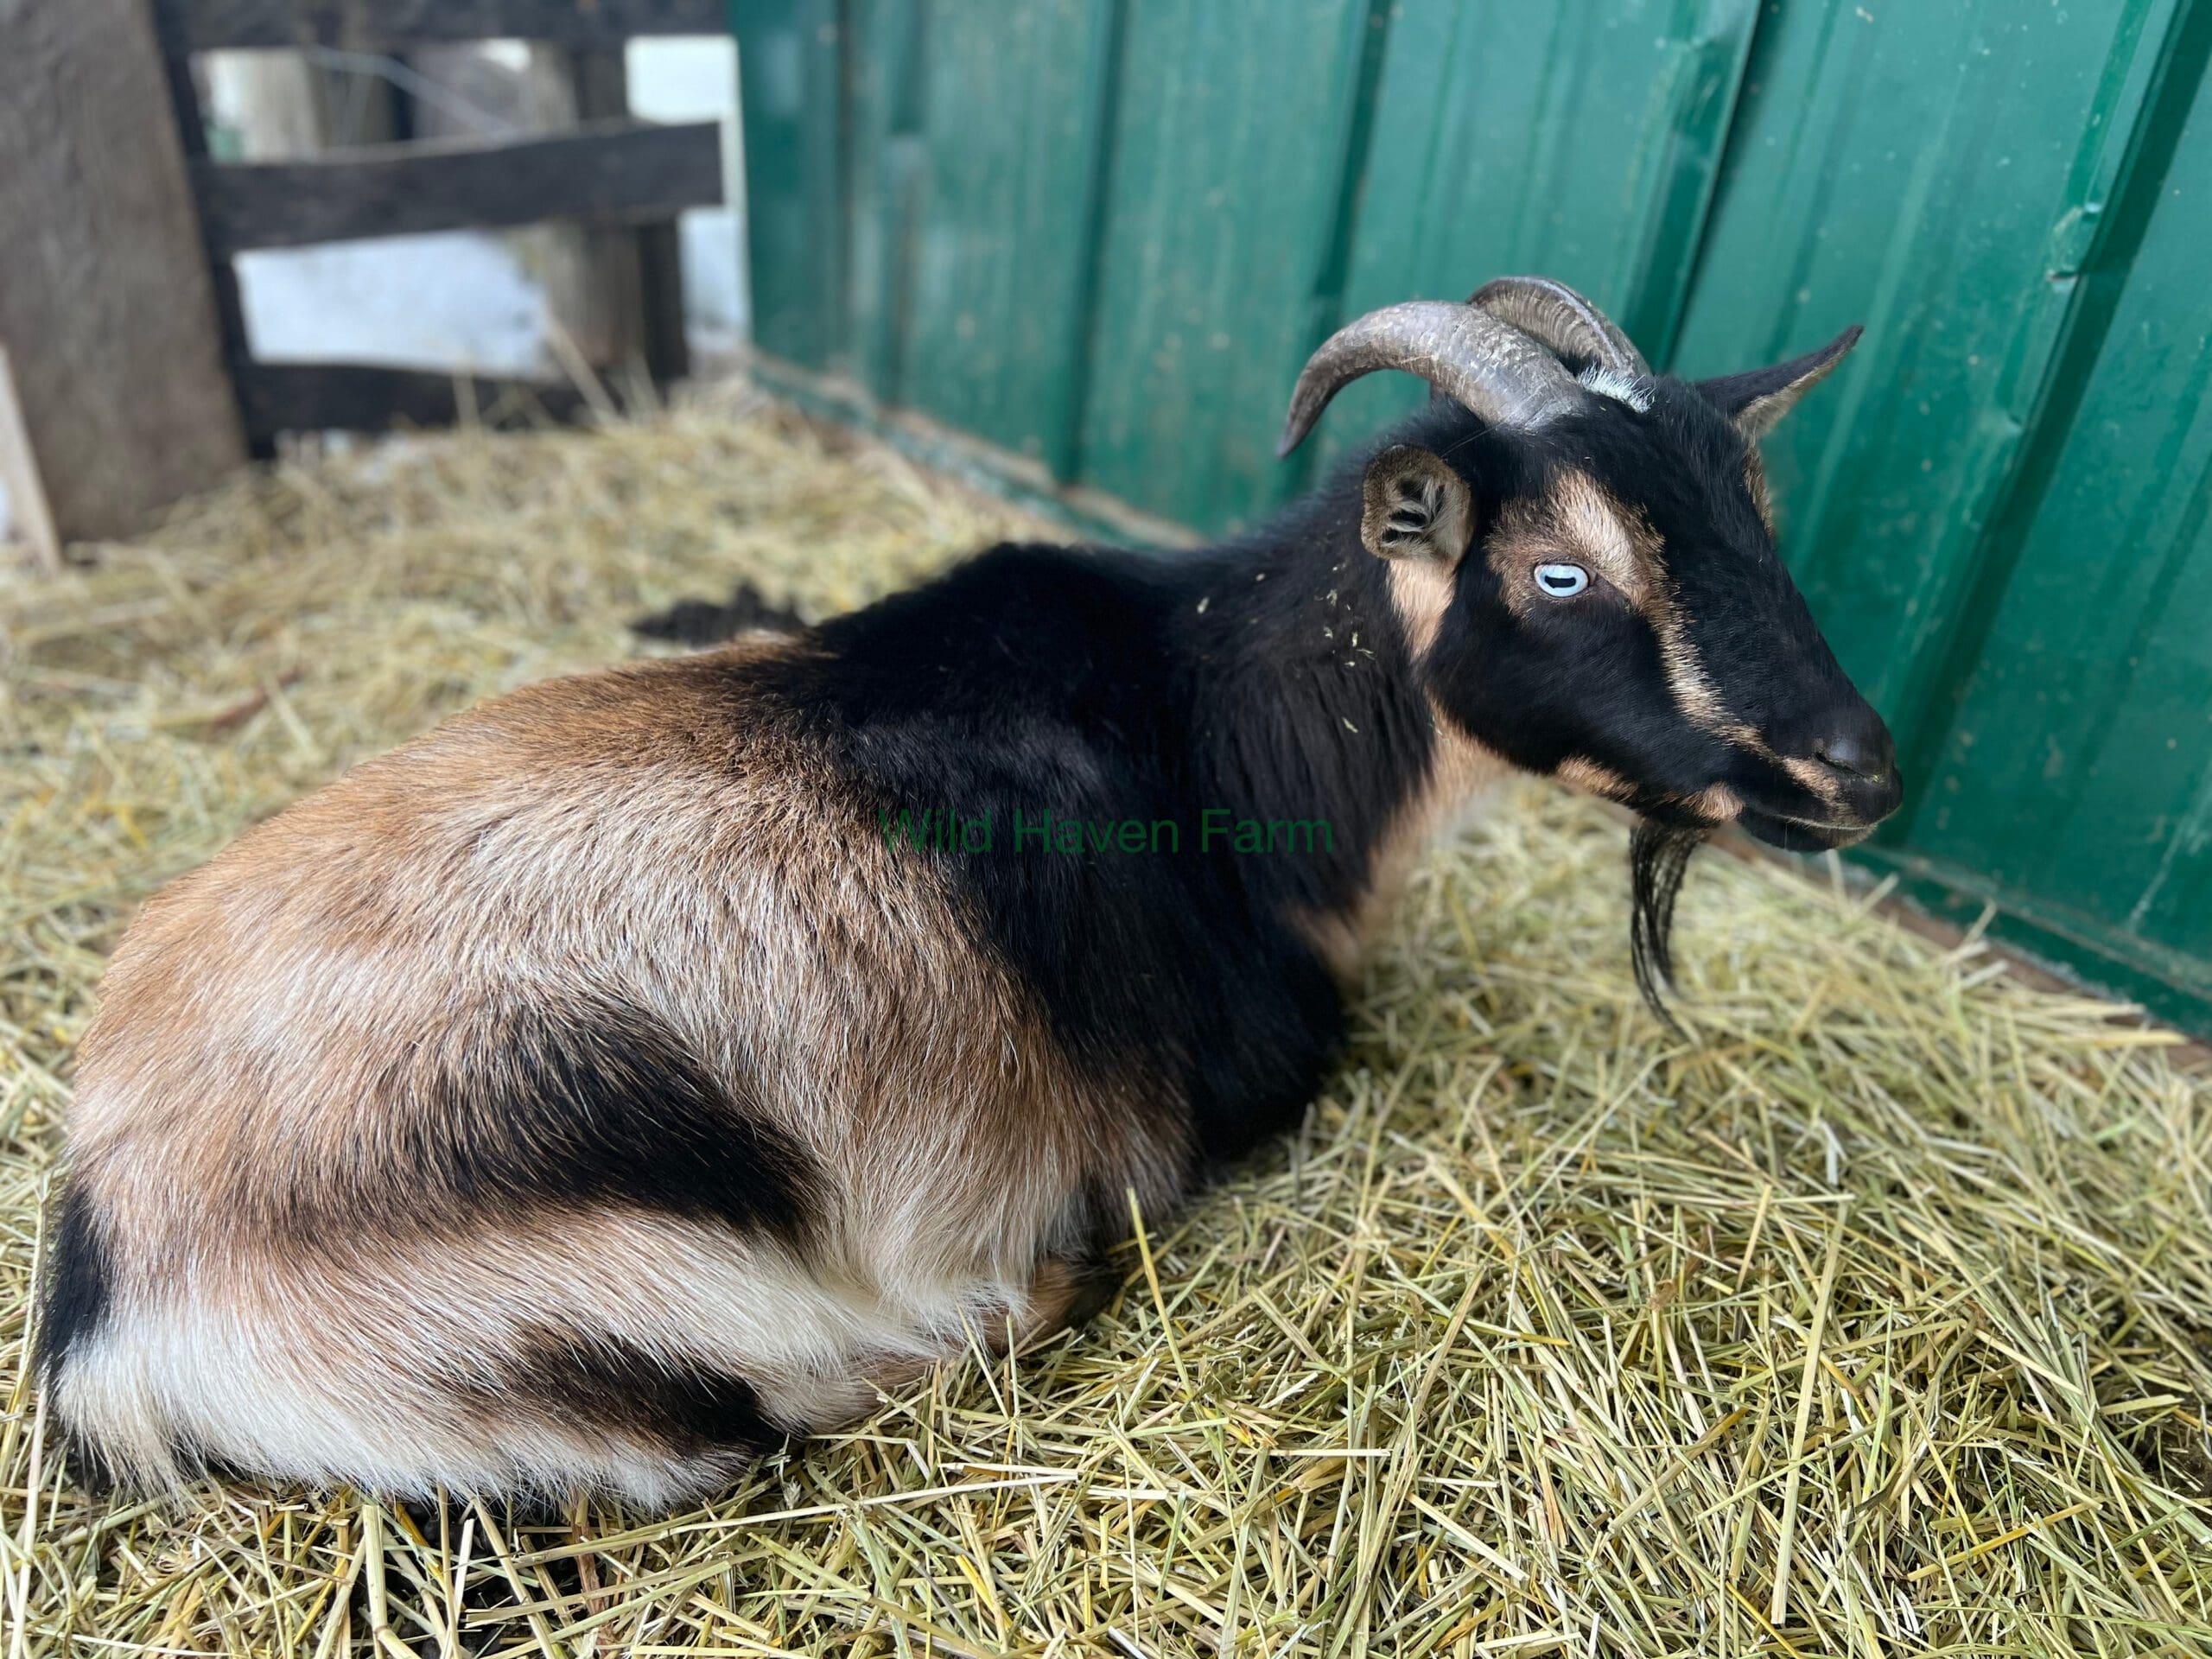 Goat named Skye laying on straw